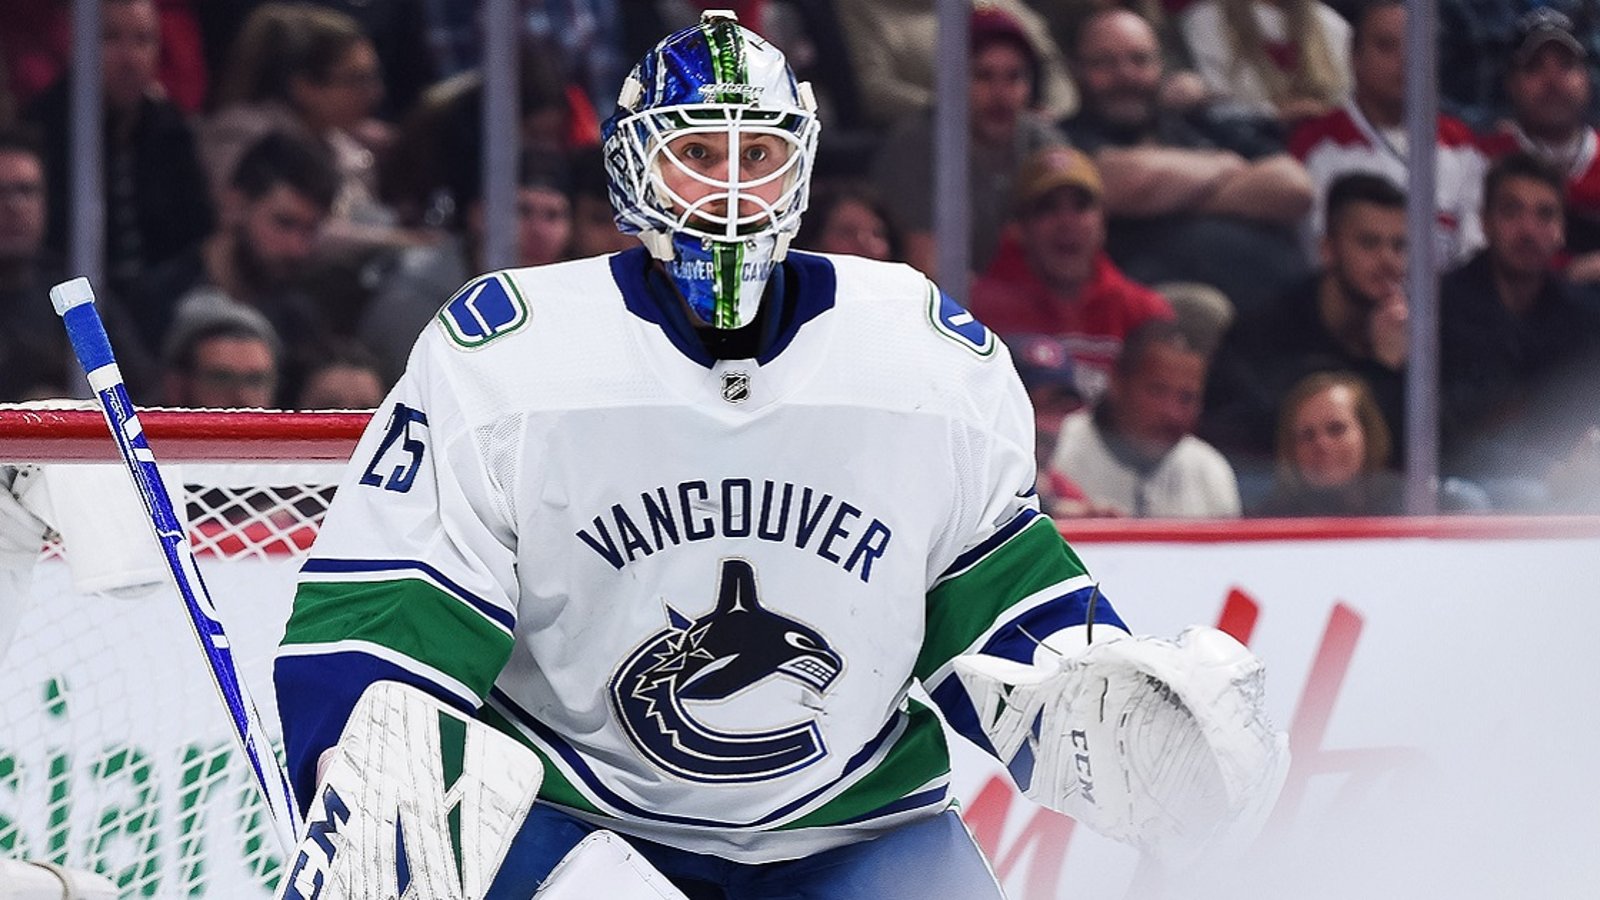 Jacob Markstrom makes a heartbreaking announcement on Sunday.